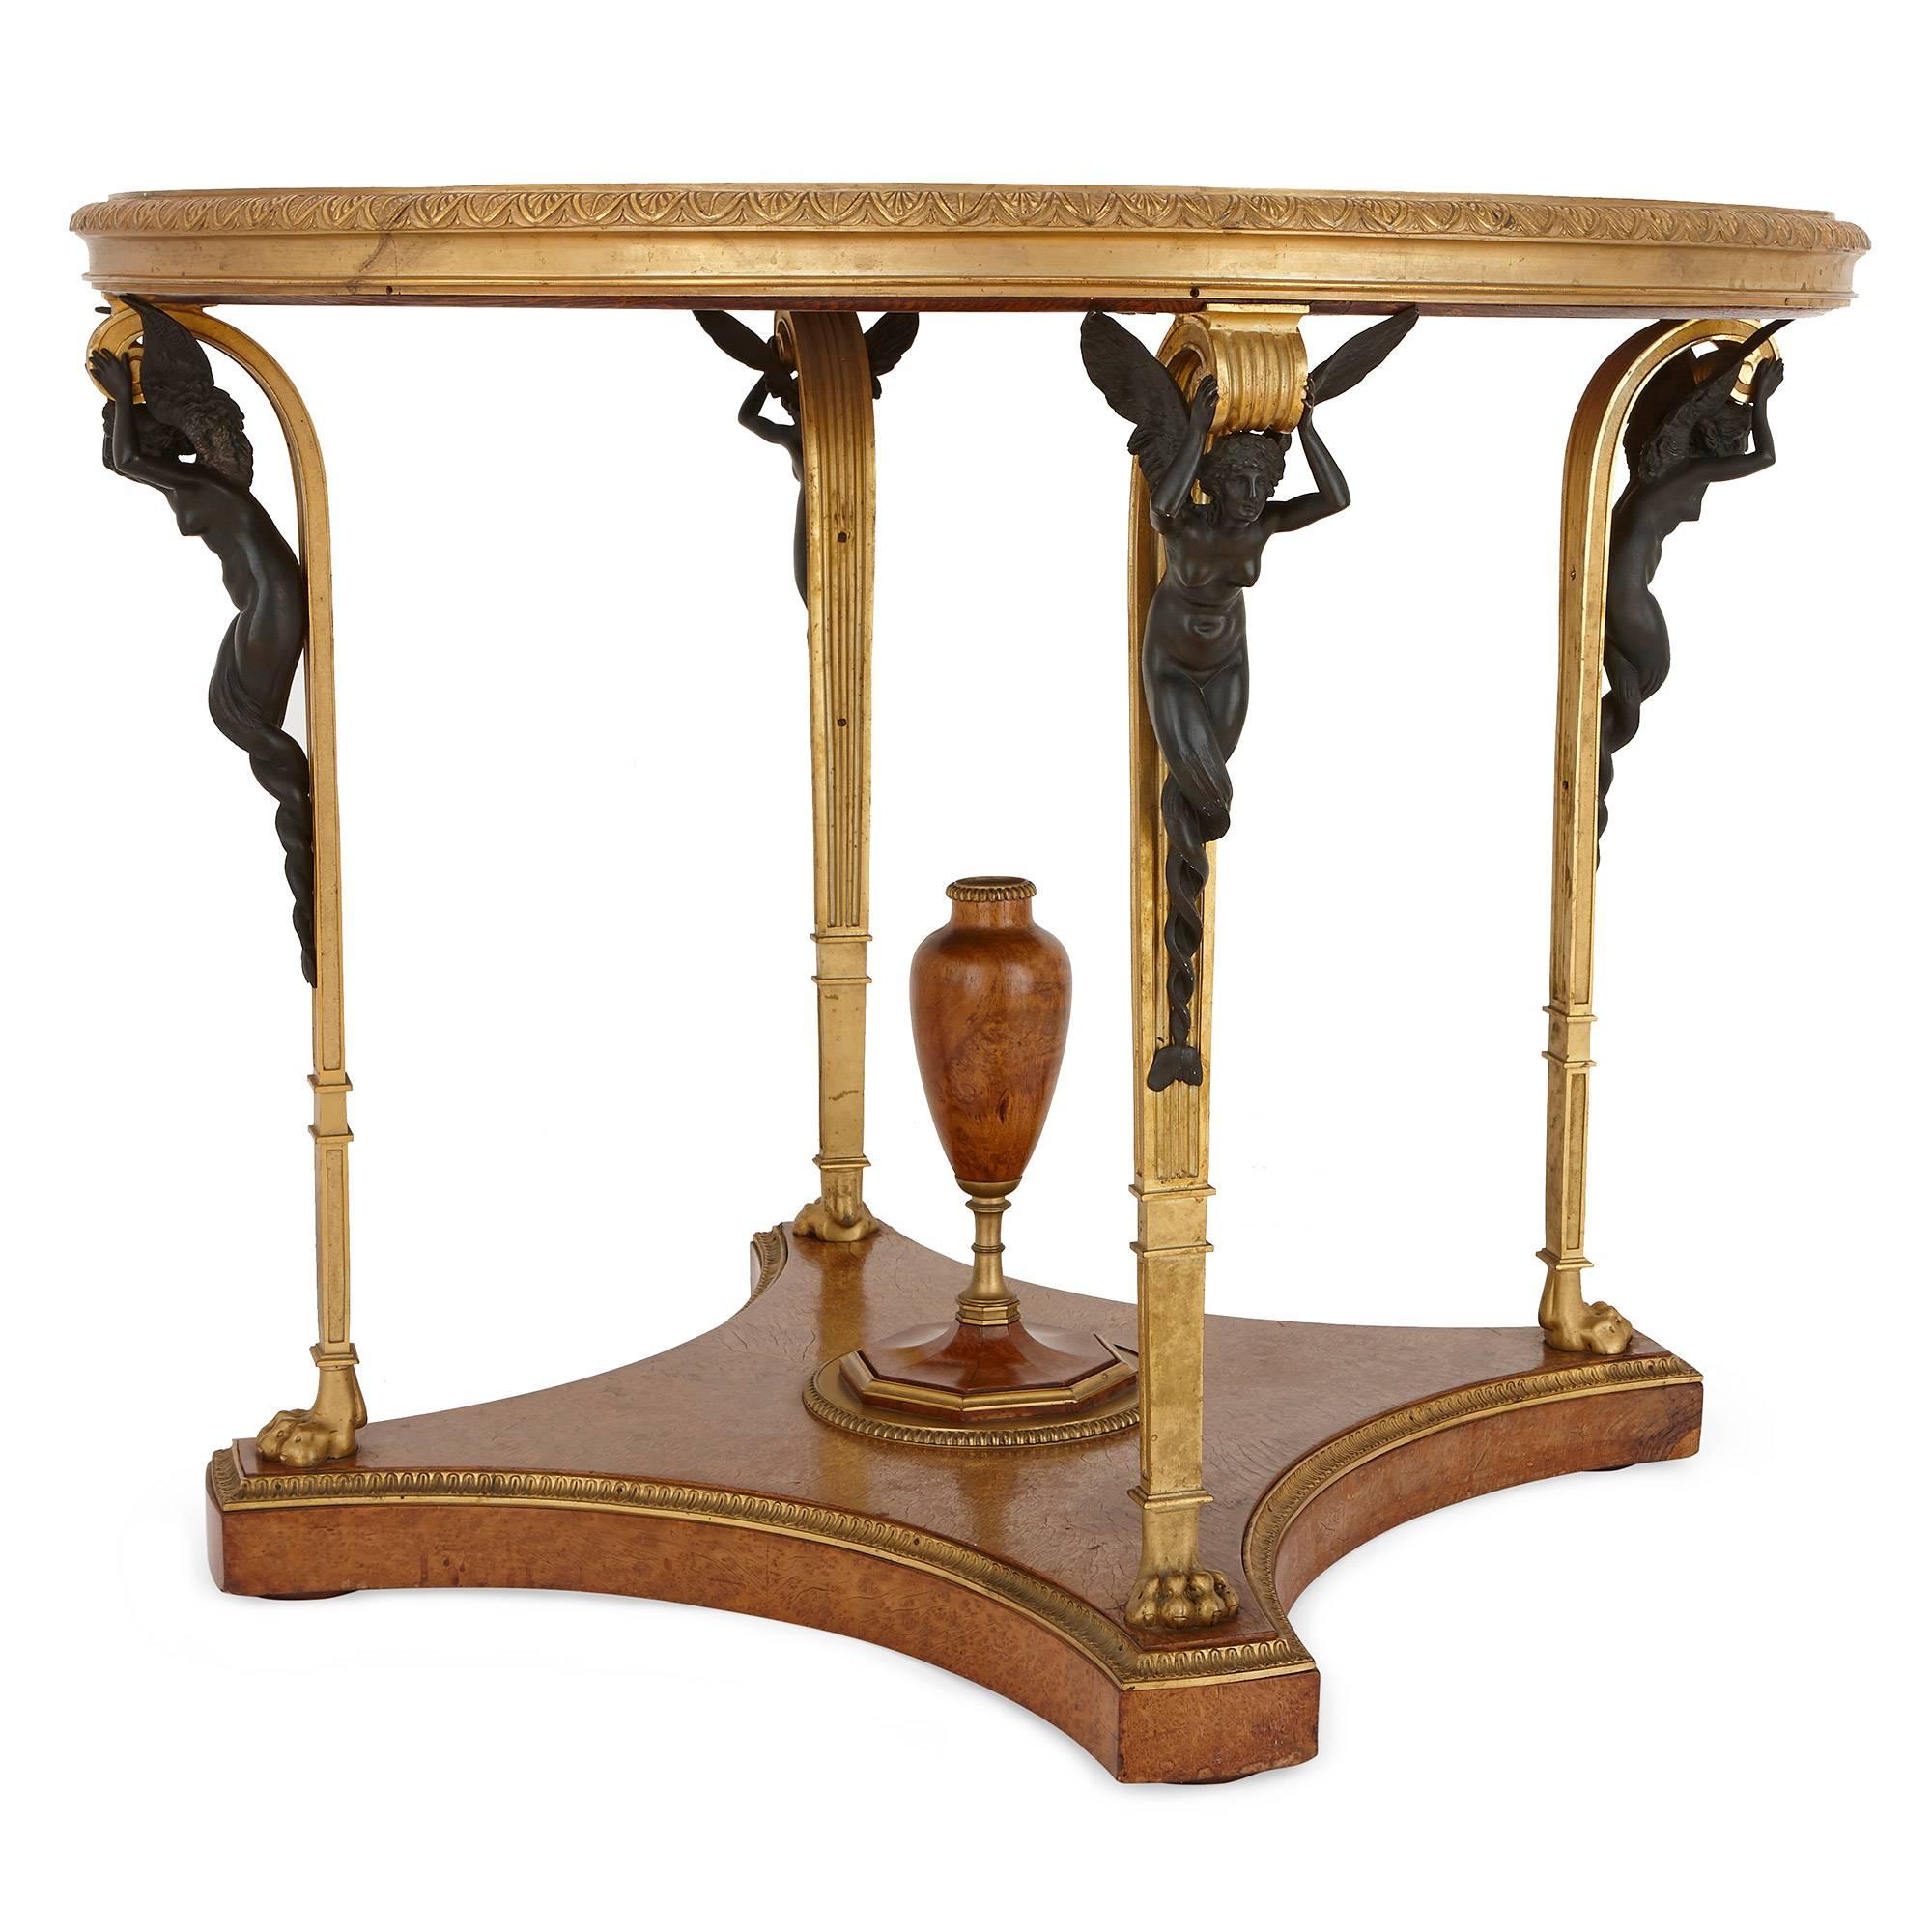 This fine, antique table is by celebrated French cabinetmaker Zwiener Jansen Successeur, part of the celebrated furniture and interior design house Maison Jansen which was founded in Paris in 1880. The design is based on a model now housed at the